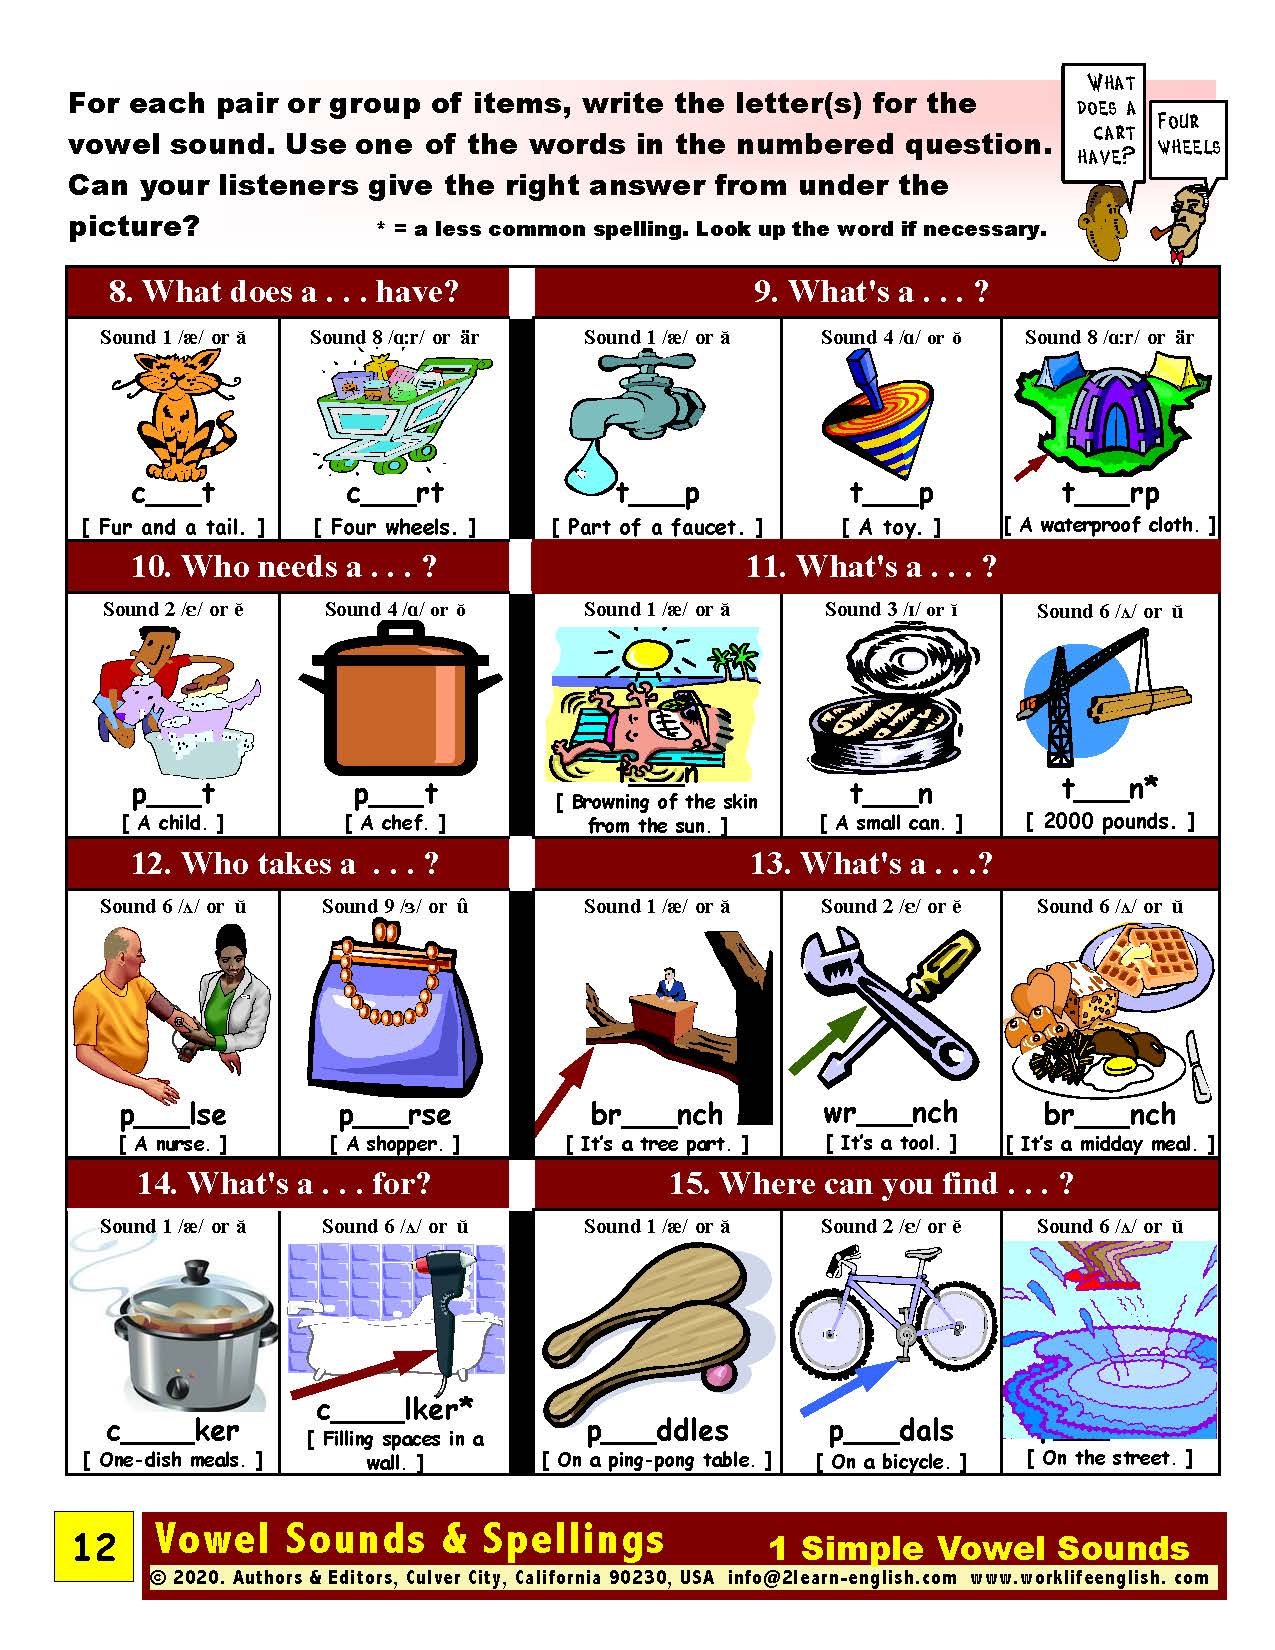 E-01.02 Recognize, Pronounce, & Contrast Simple Vowel Sounds in Words for Things